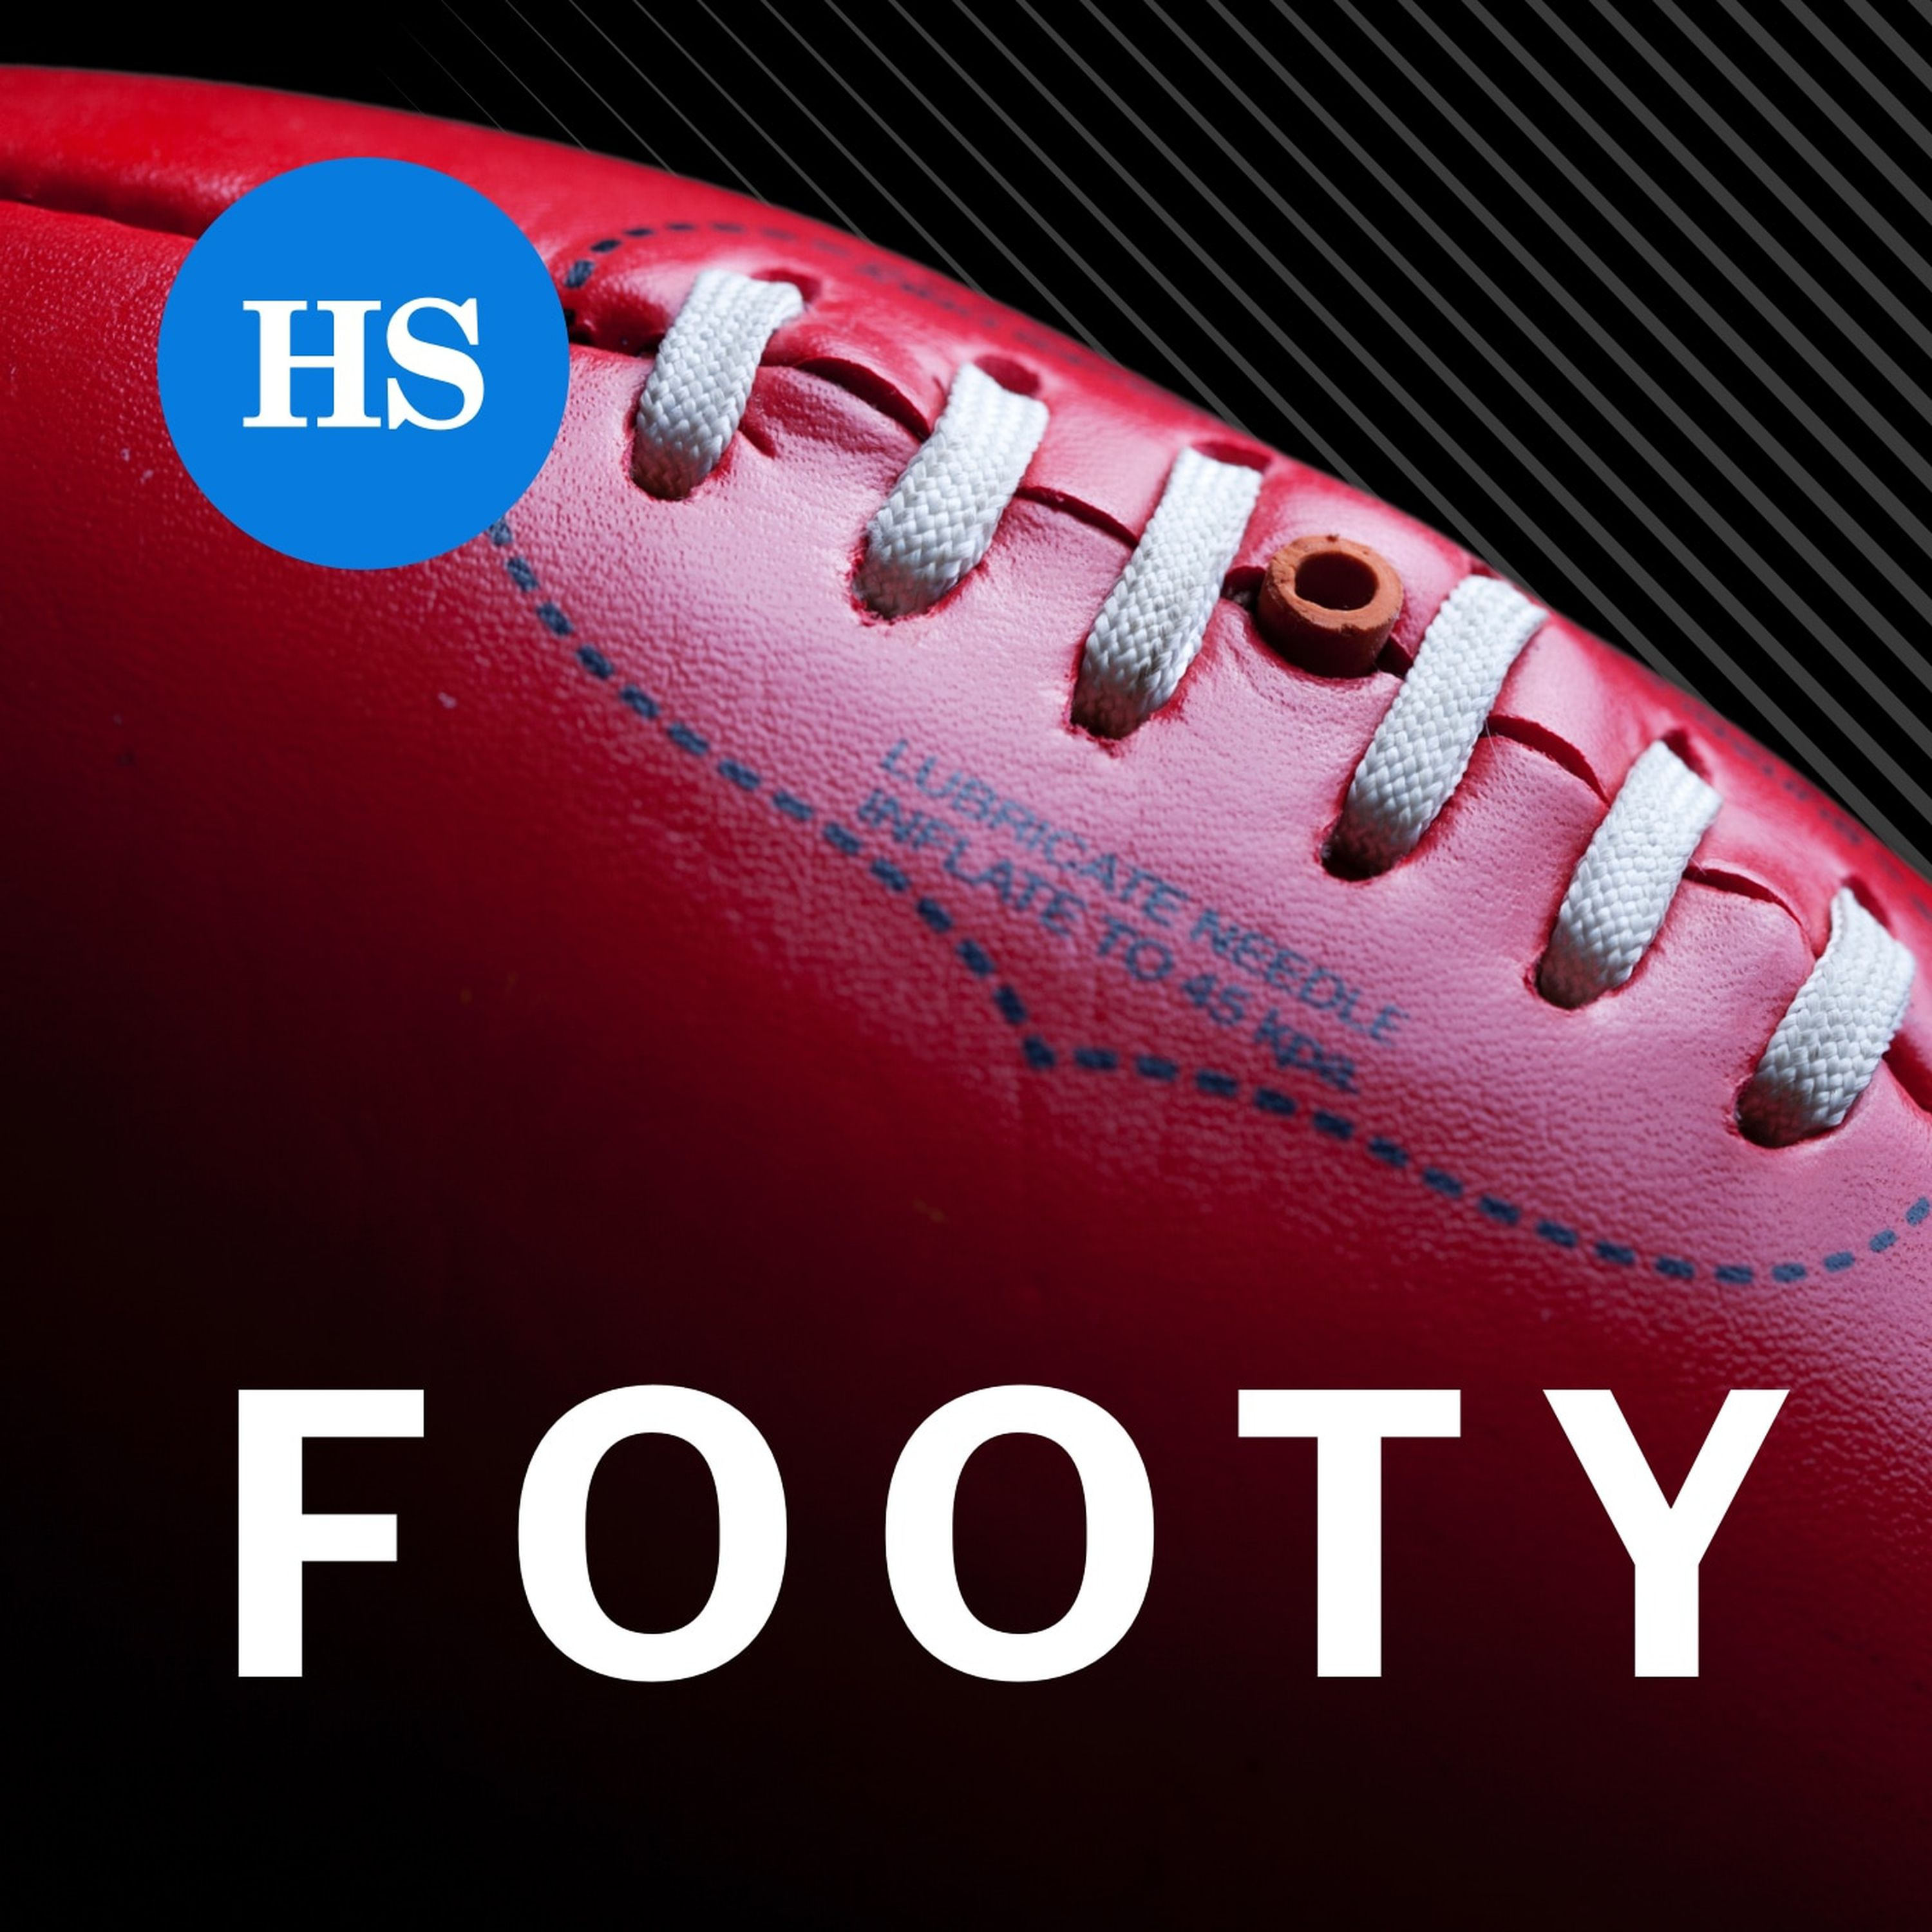 Does footy need fixing?